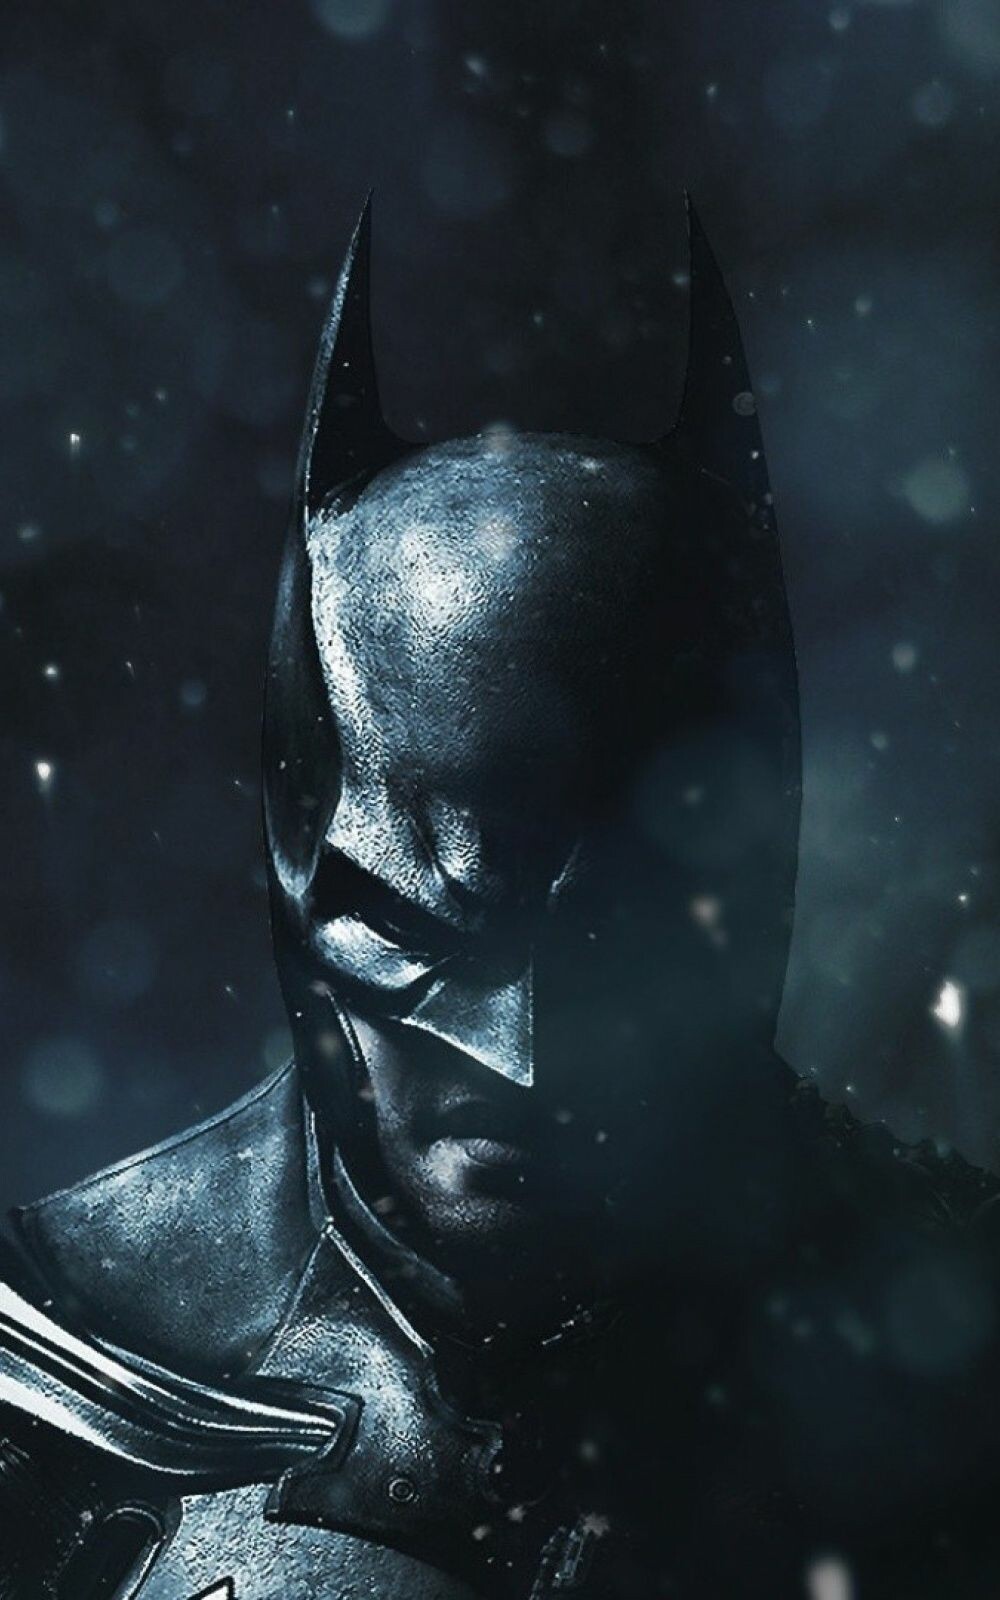 57+ Batman Wallpapers: HD, 4K, 5K for PC and Mobile